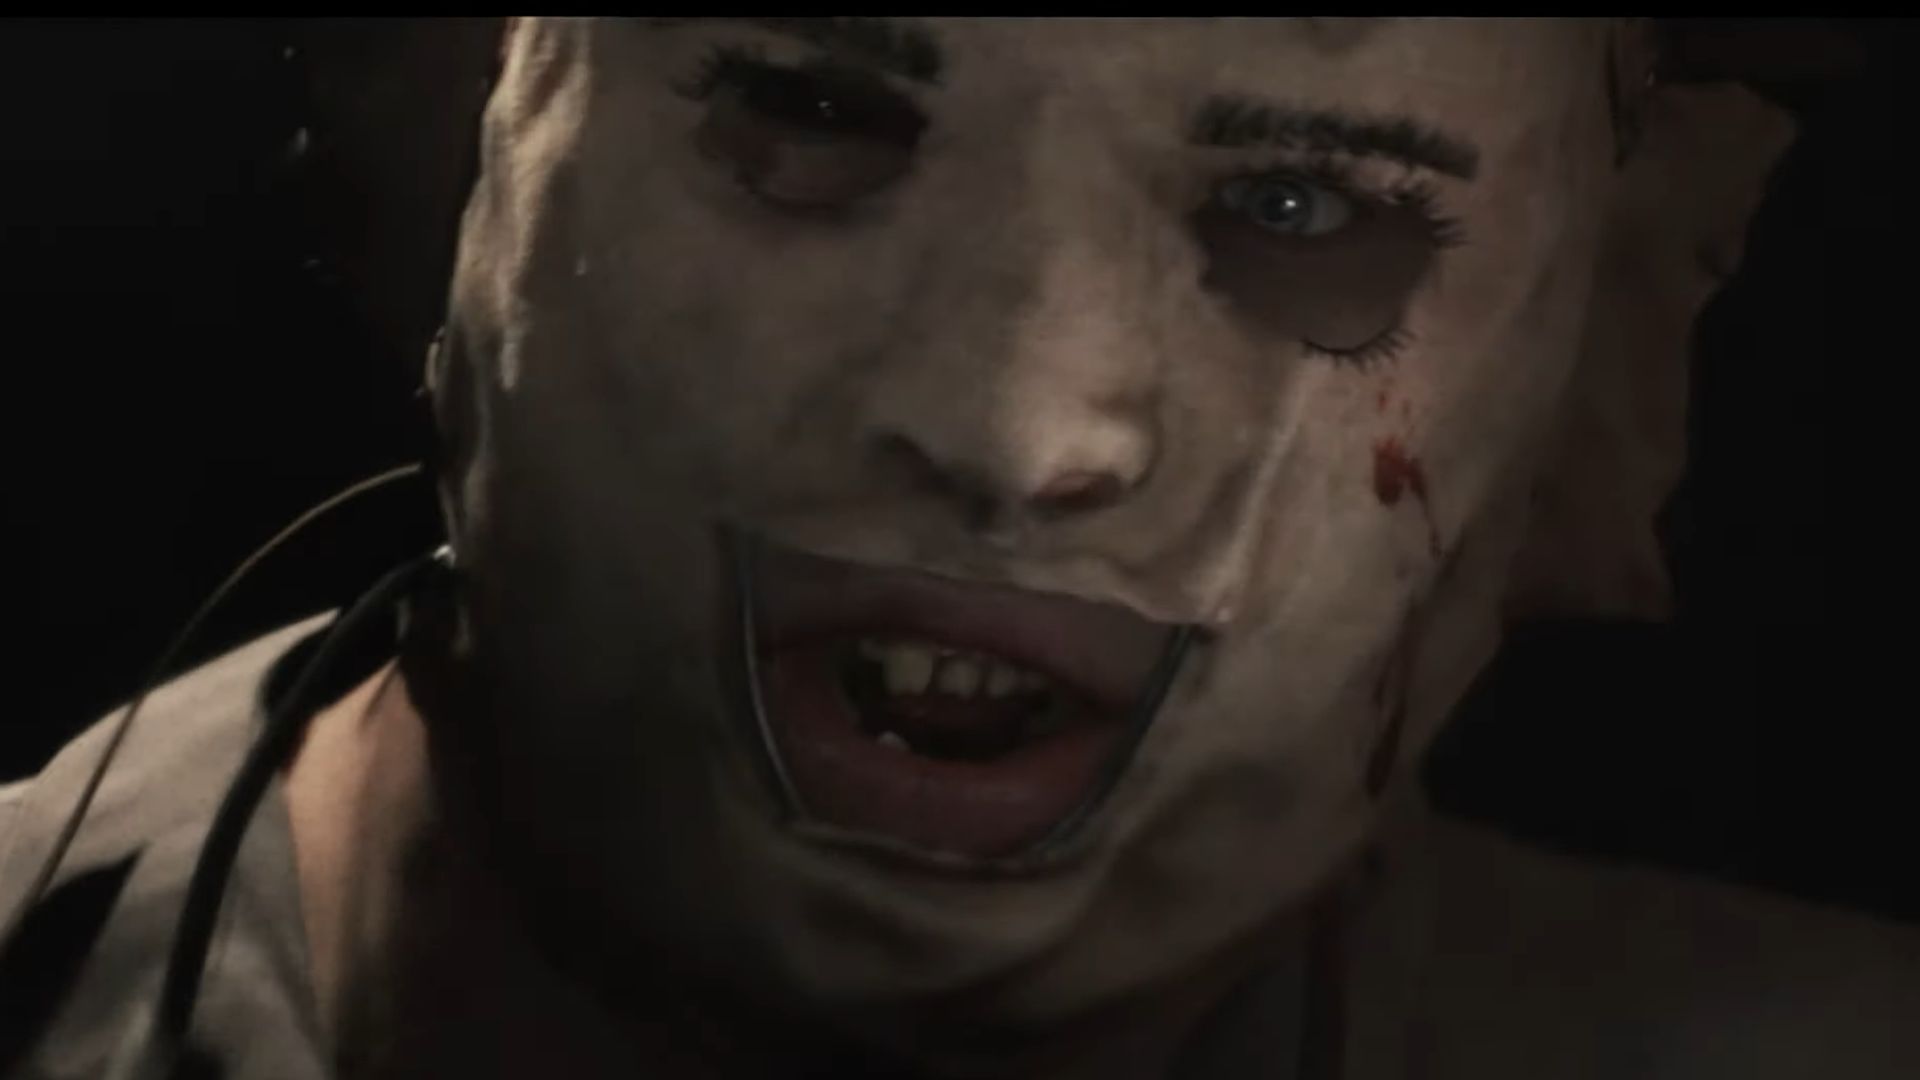  Check out how the Texas Chainsaw Massacre game perfectly recreates scenes from the movie 